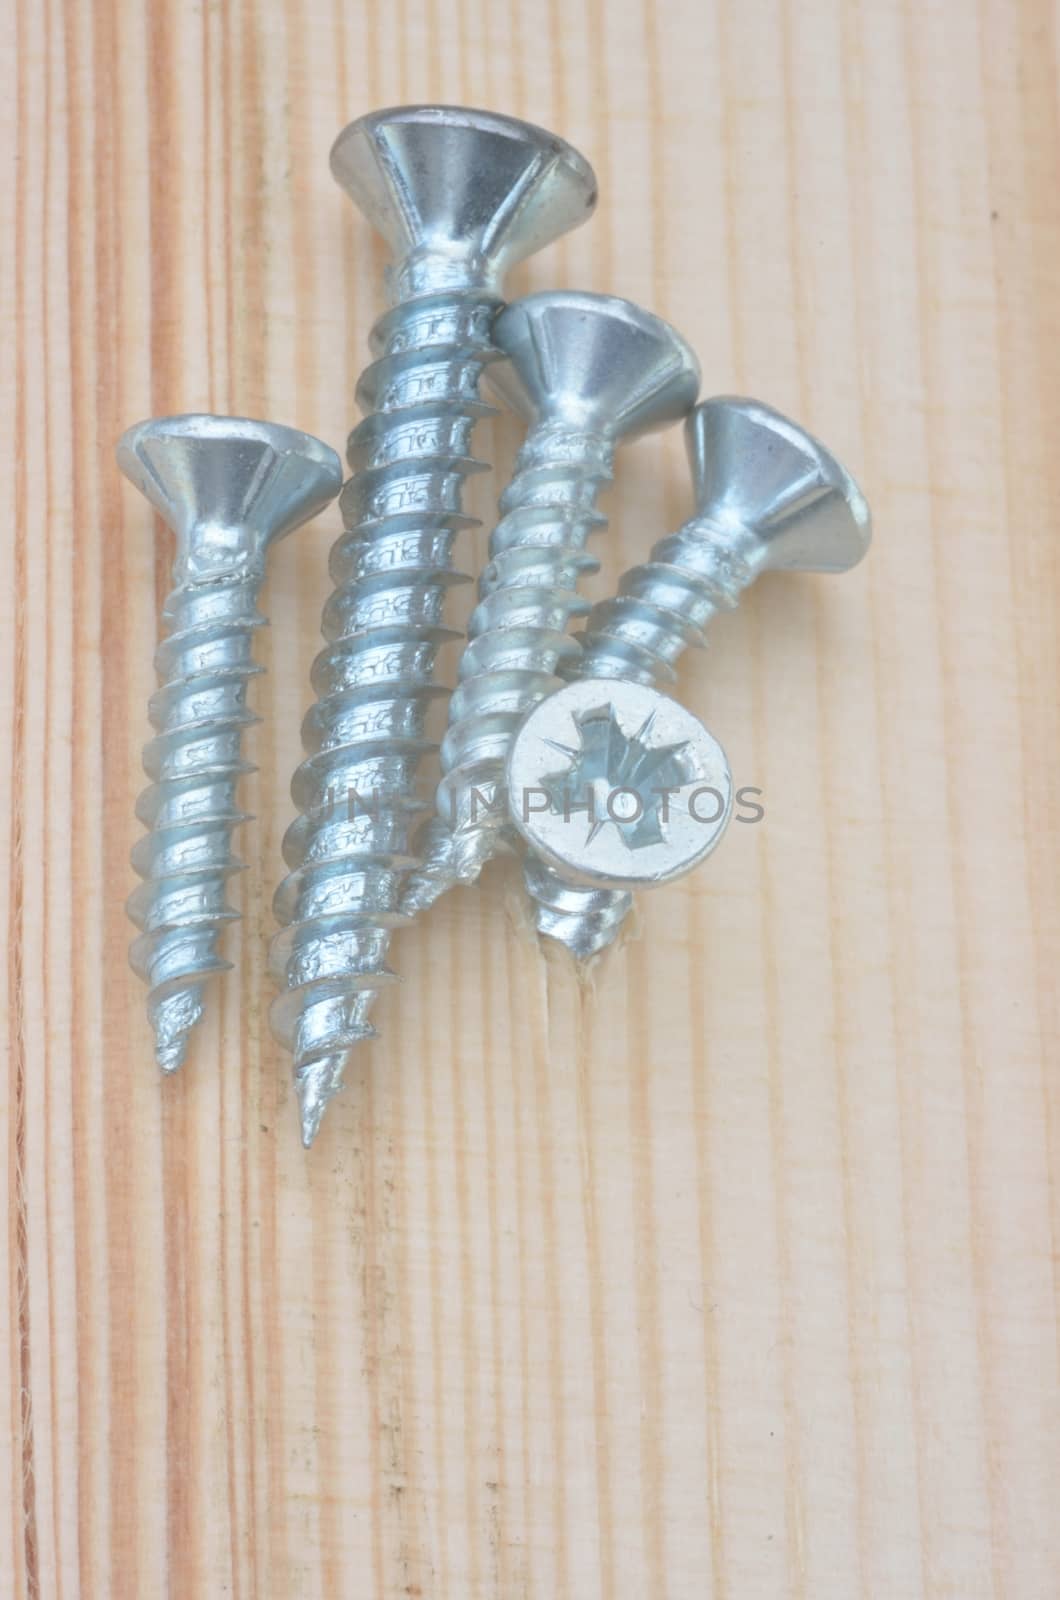 Group of screws on plank background by pauws99